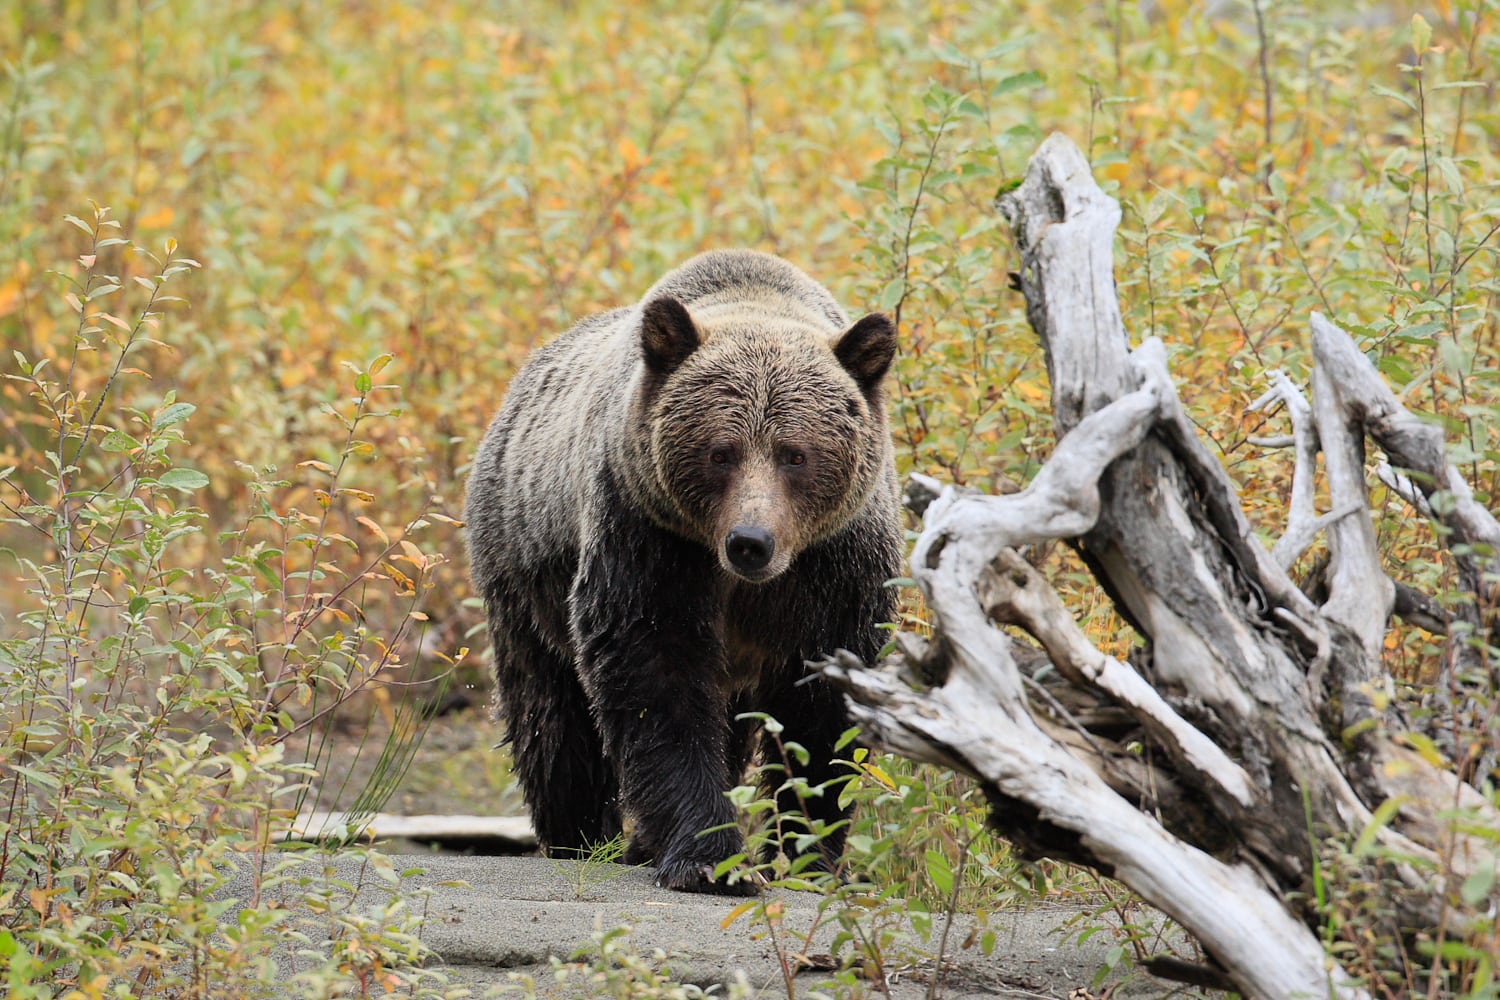 A grizzly bear at Wild Bear Lodge